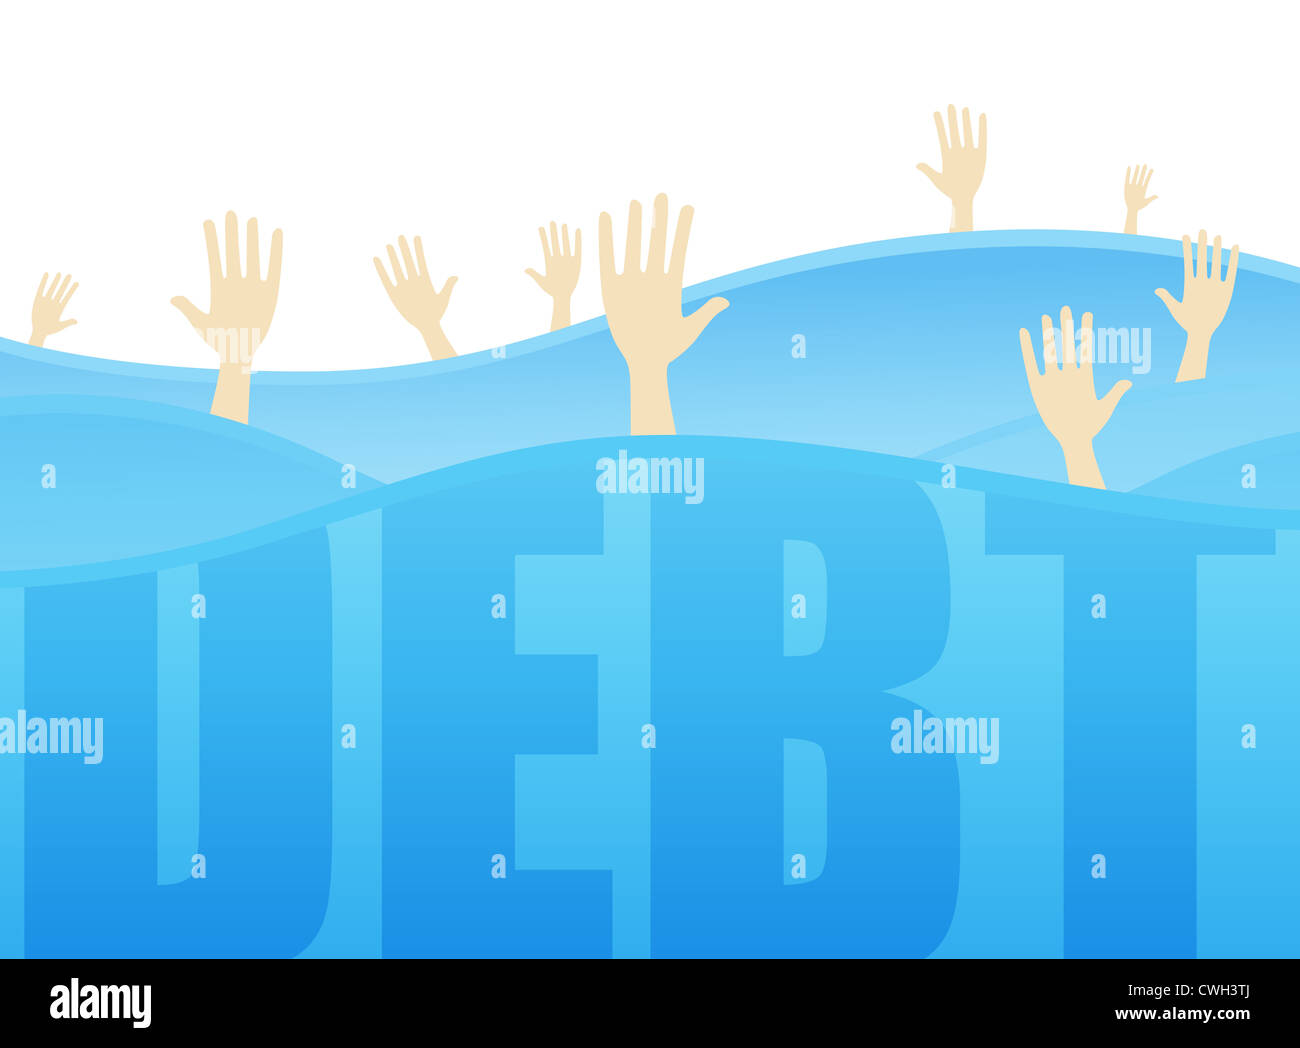 Several hands reaching for help while drowning in the ocean of debt. Stock Photo